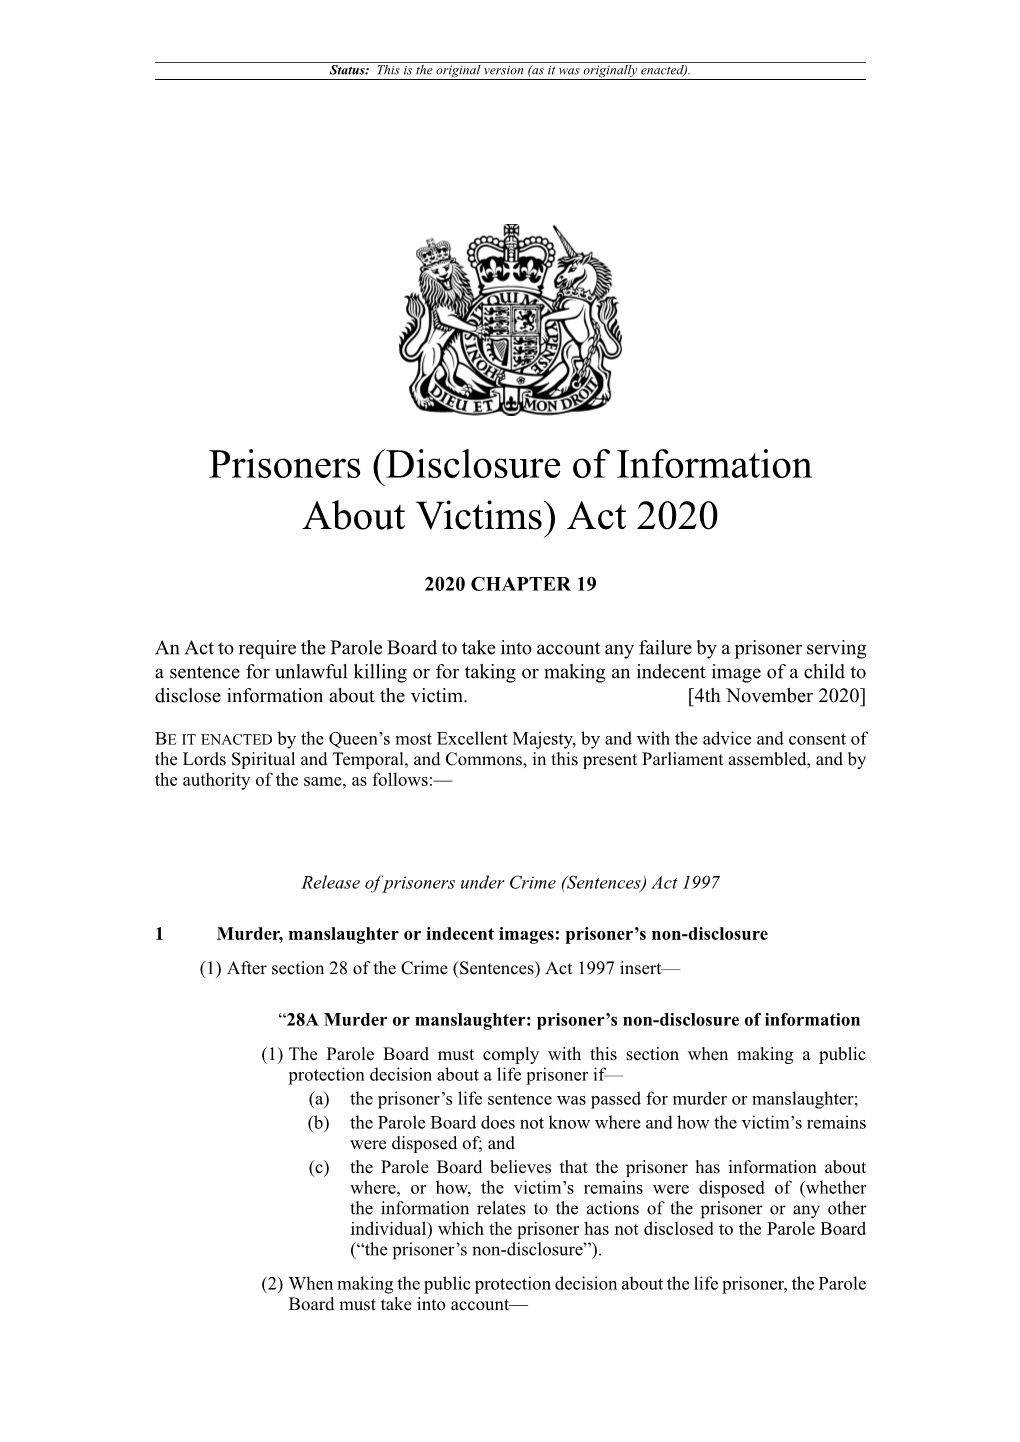 Prisoners (Disclosure of Information About Victims) Act 2020